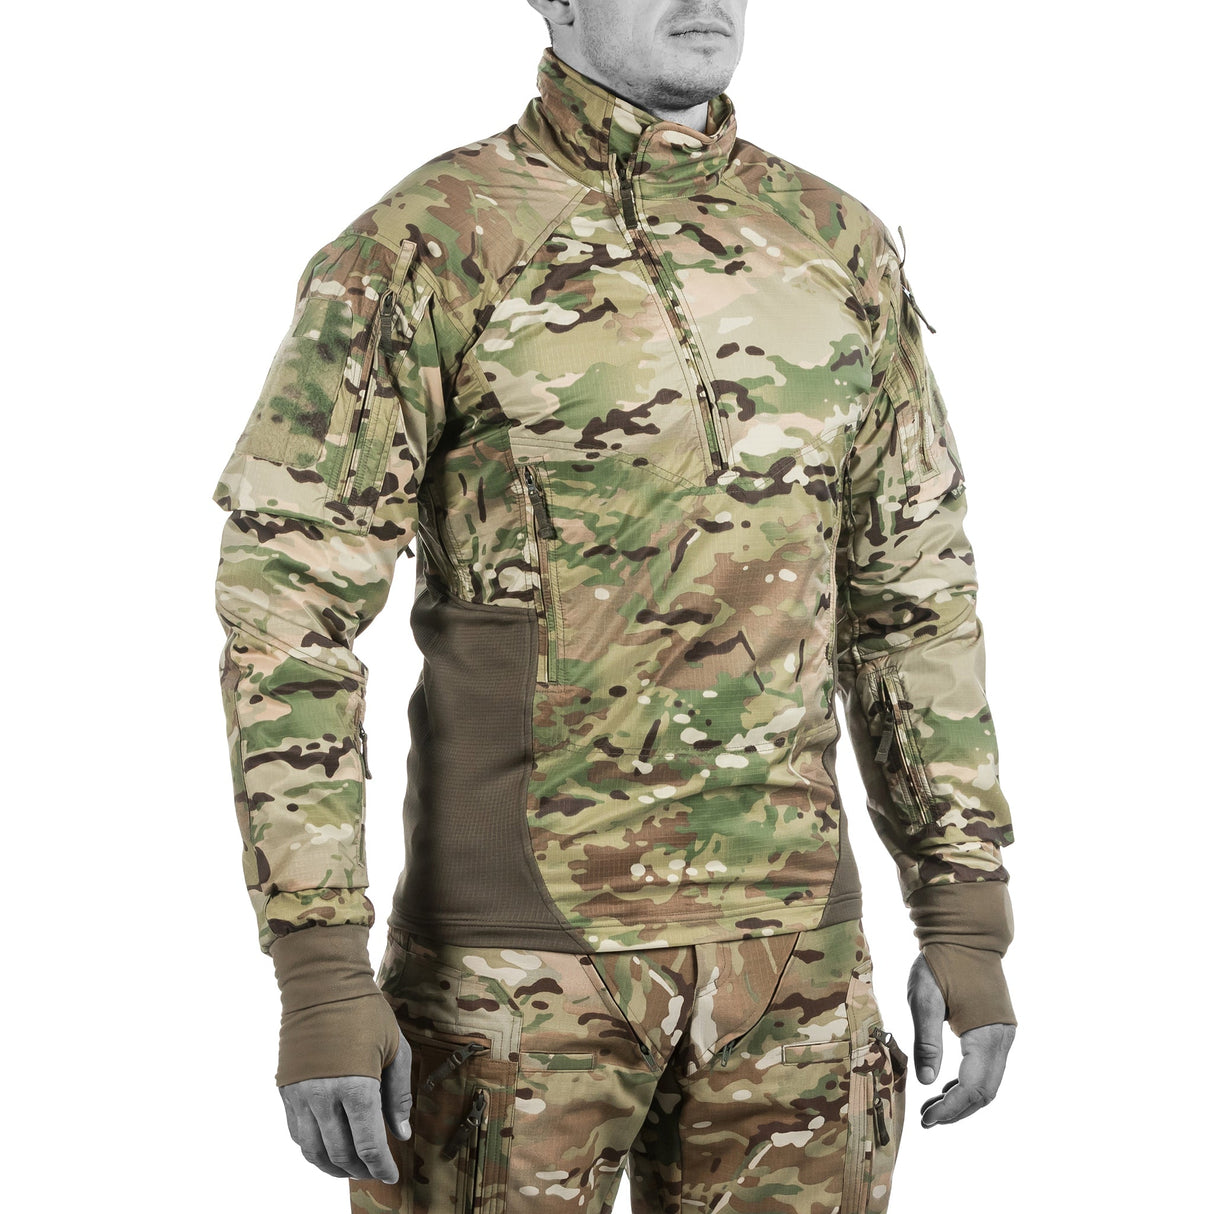 UF PRO Ace Winter Combat Shirt: Stay Warm in Extreme Cold Conditions –  Urban Tactical